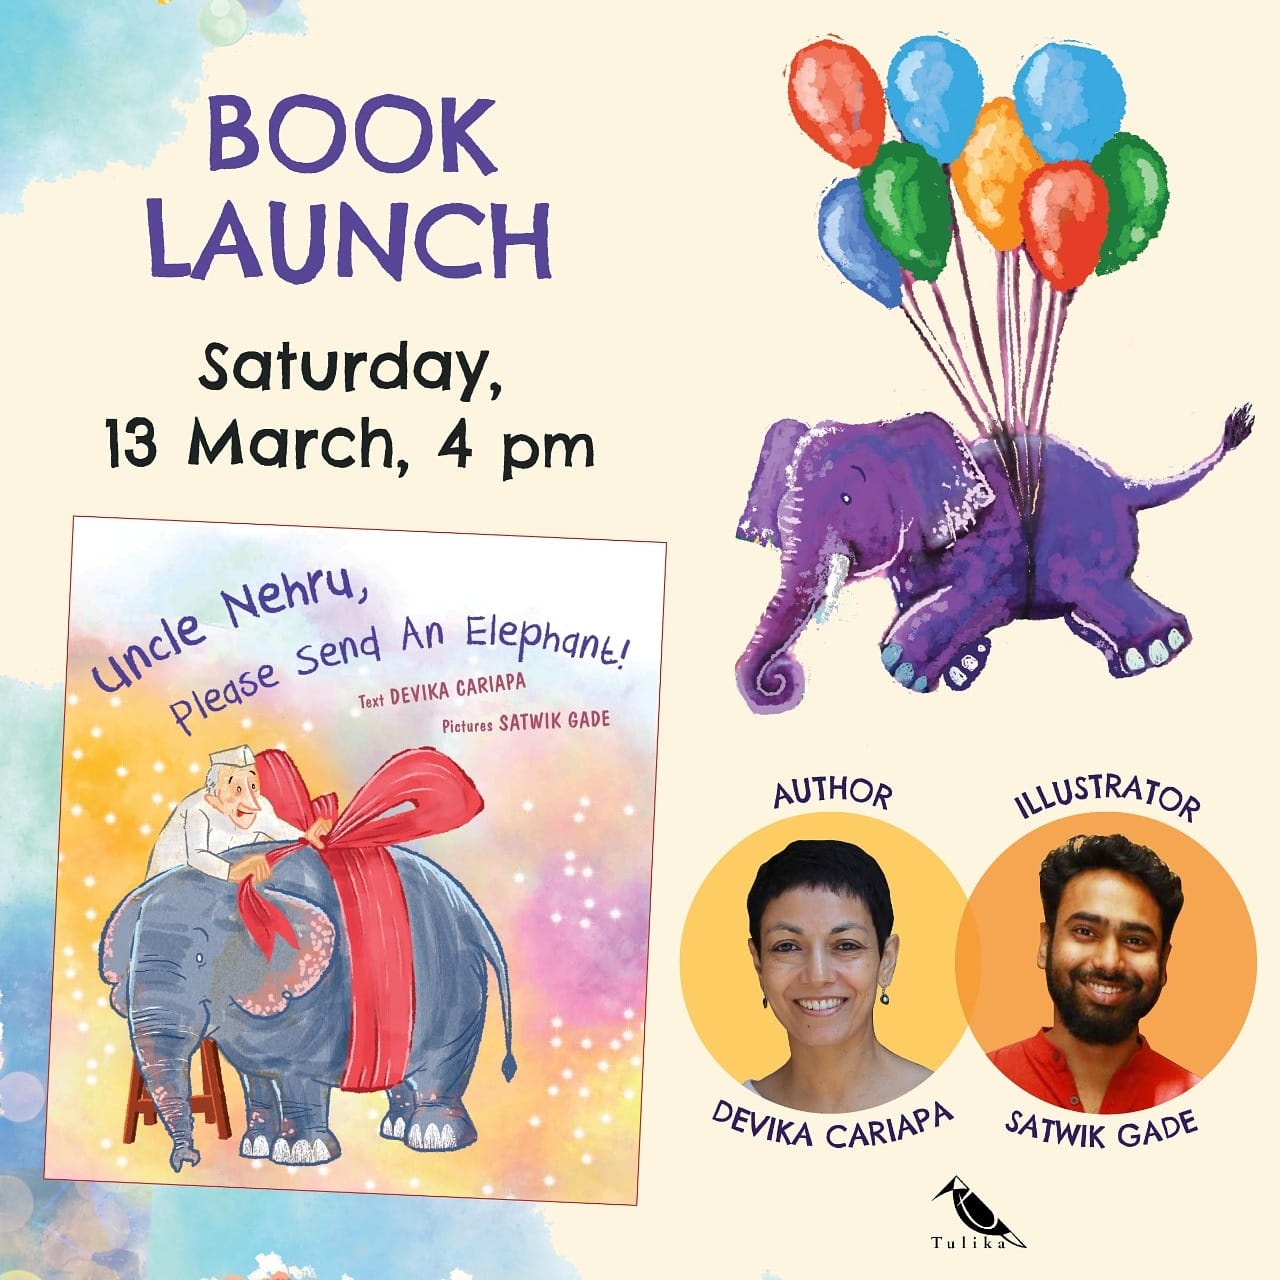 BOOK LAUNCH